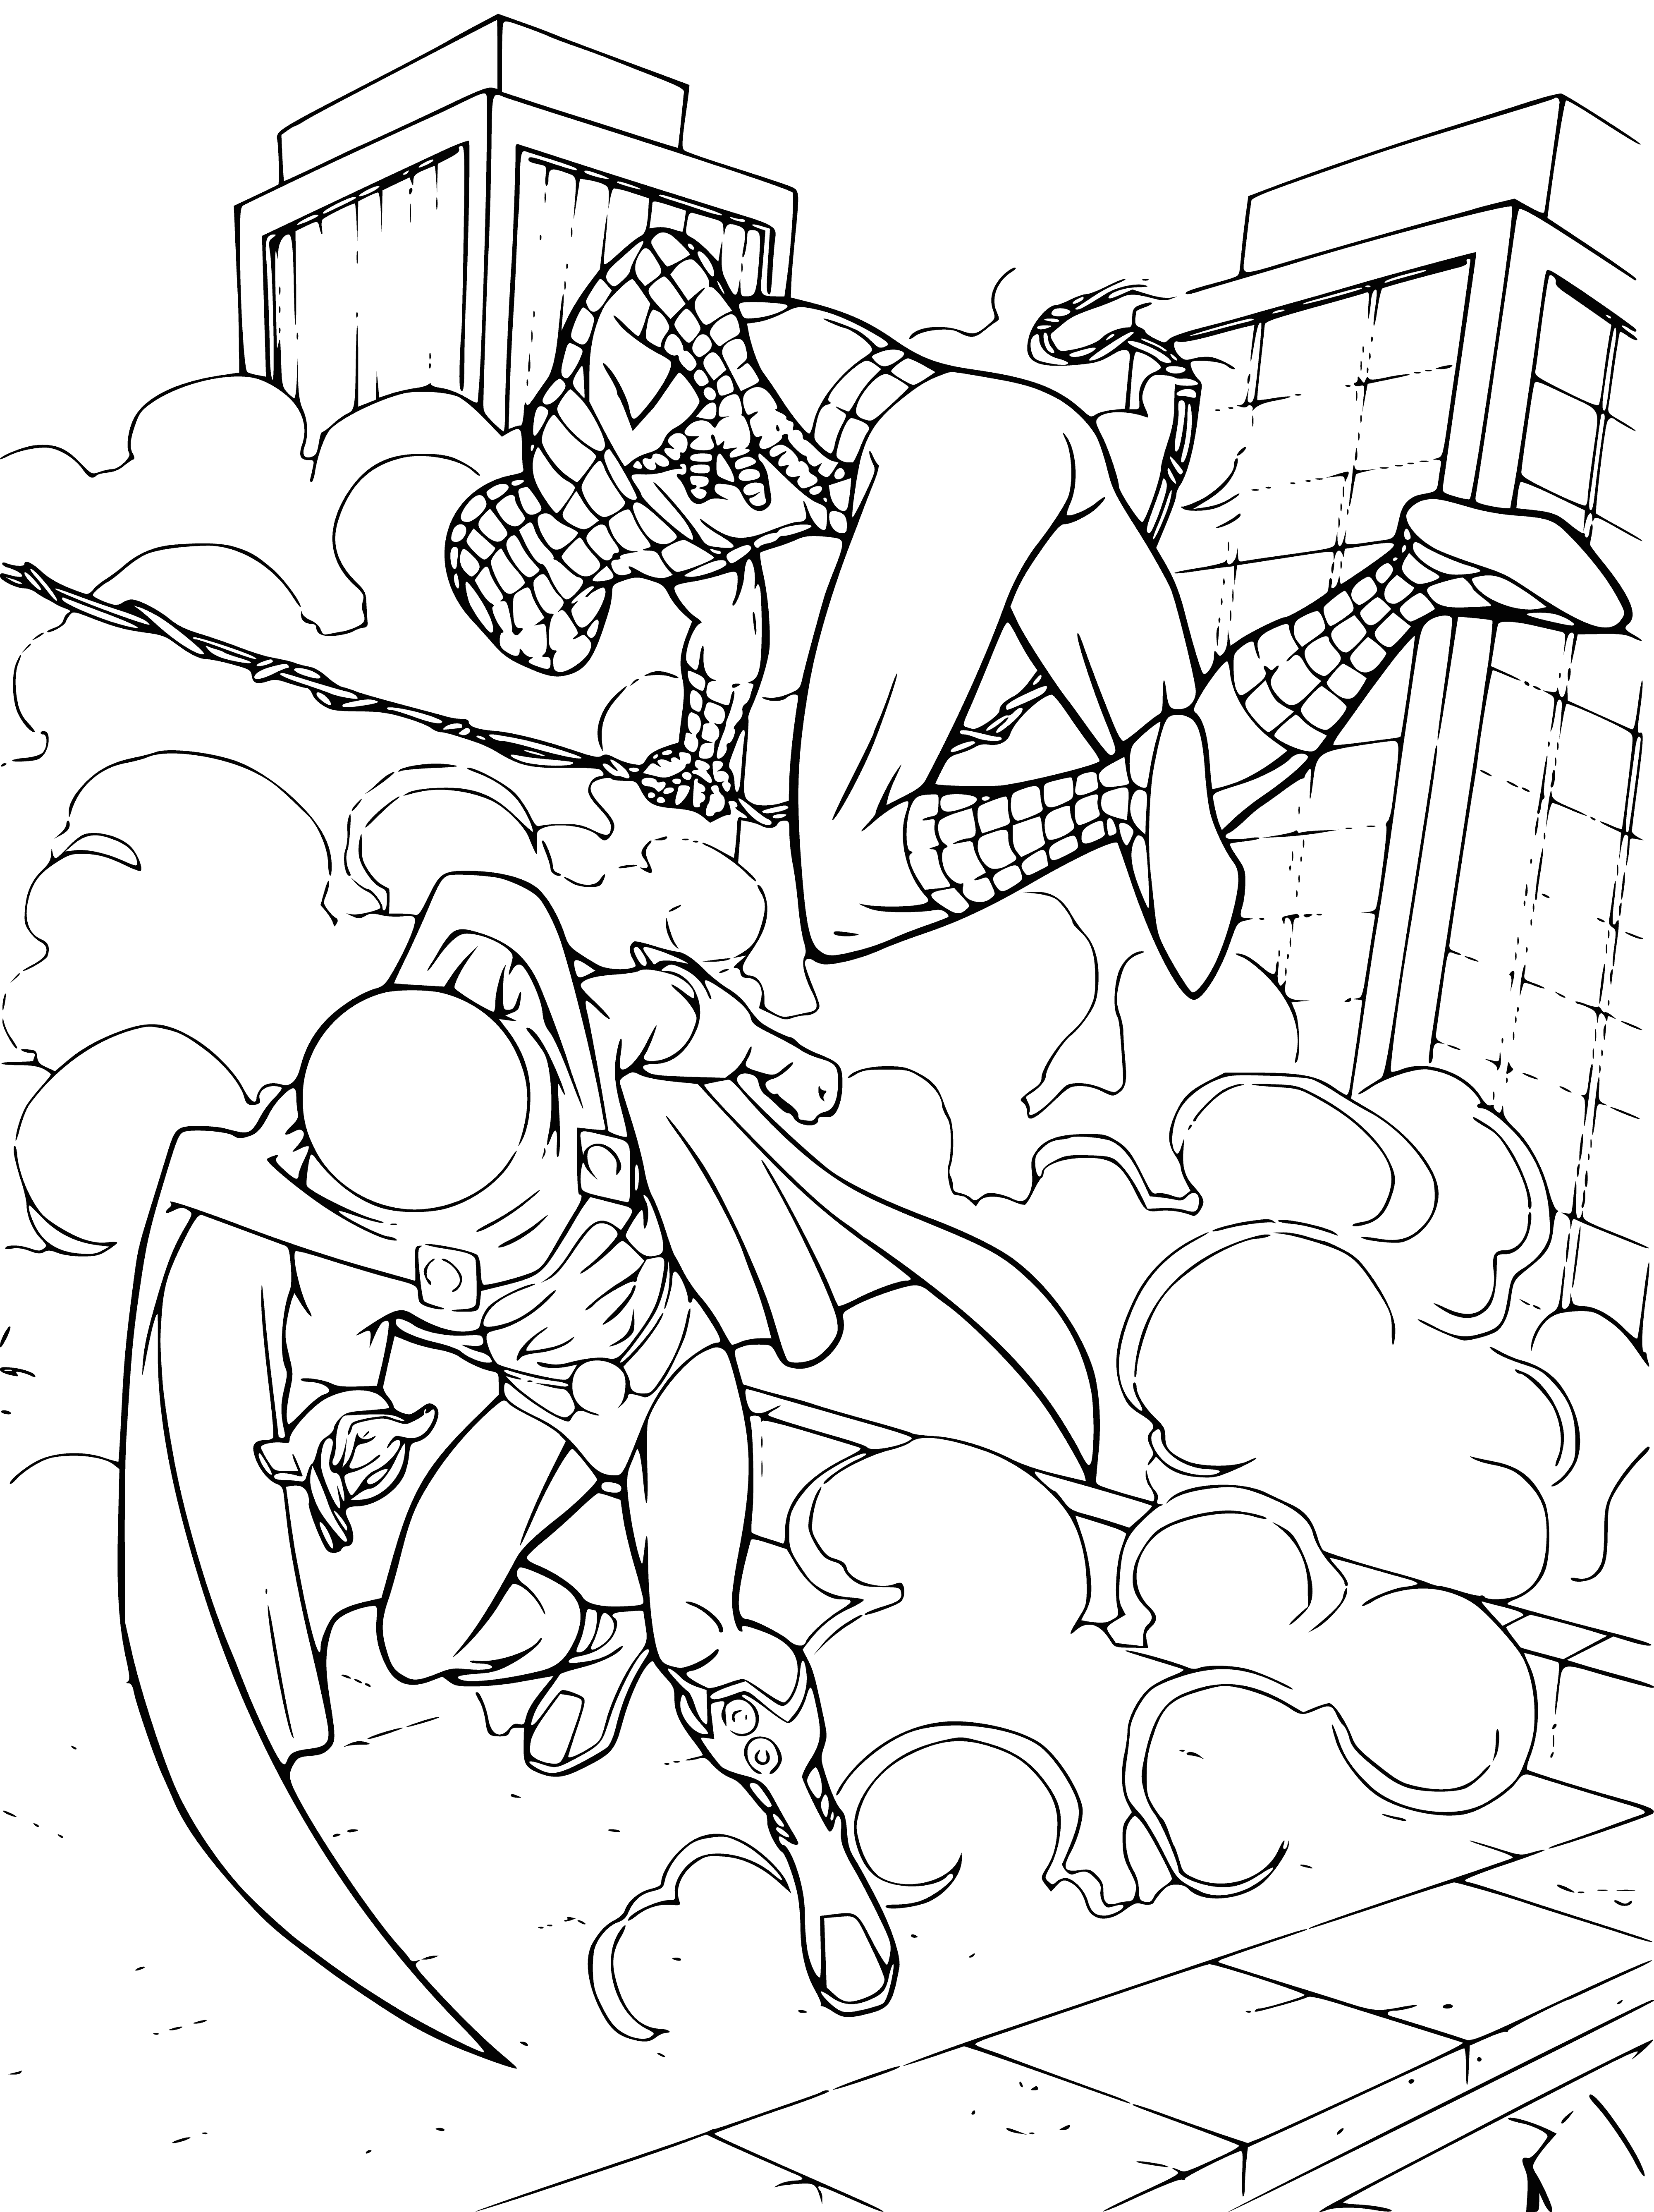 coloring page: Spider-Man stands against a blue and white background with a red and blue costume with a black spider web design, arms raised and lowered. Eyes wide, mouth small. #SpiderMan